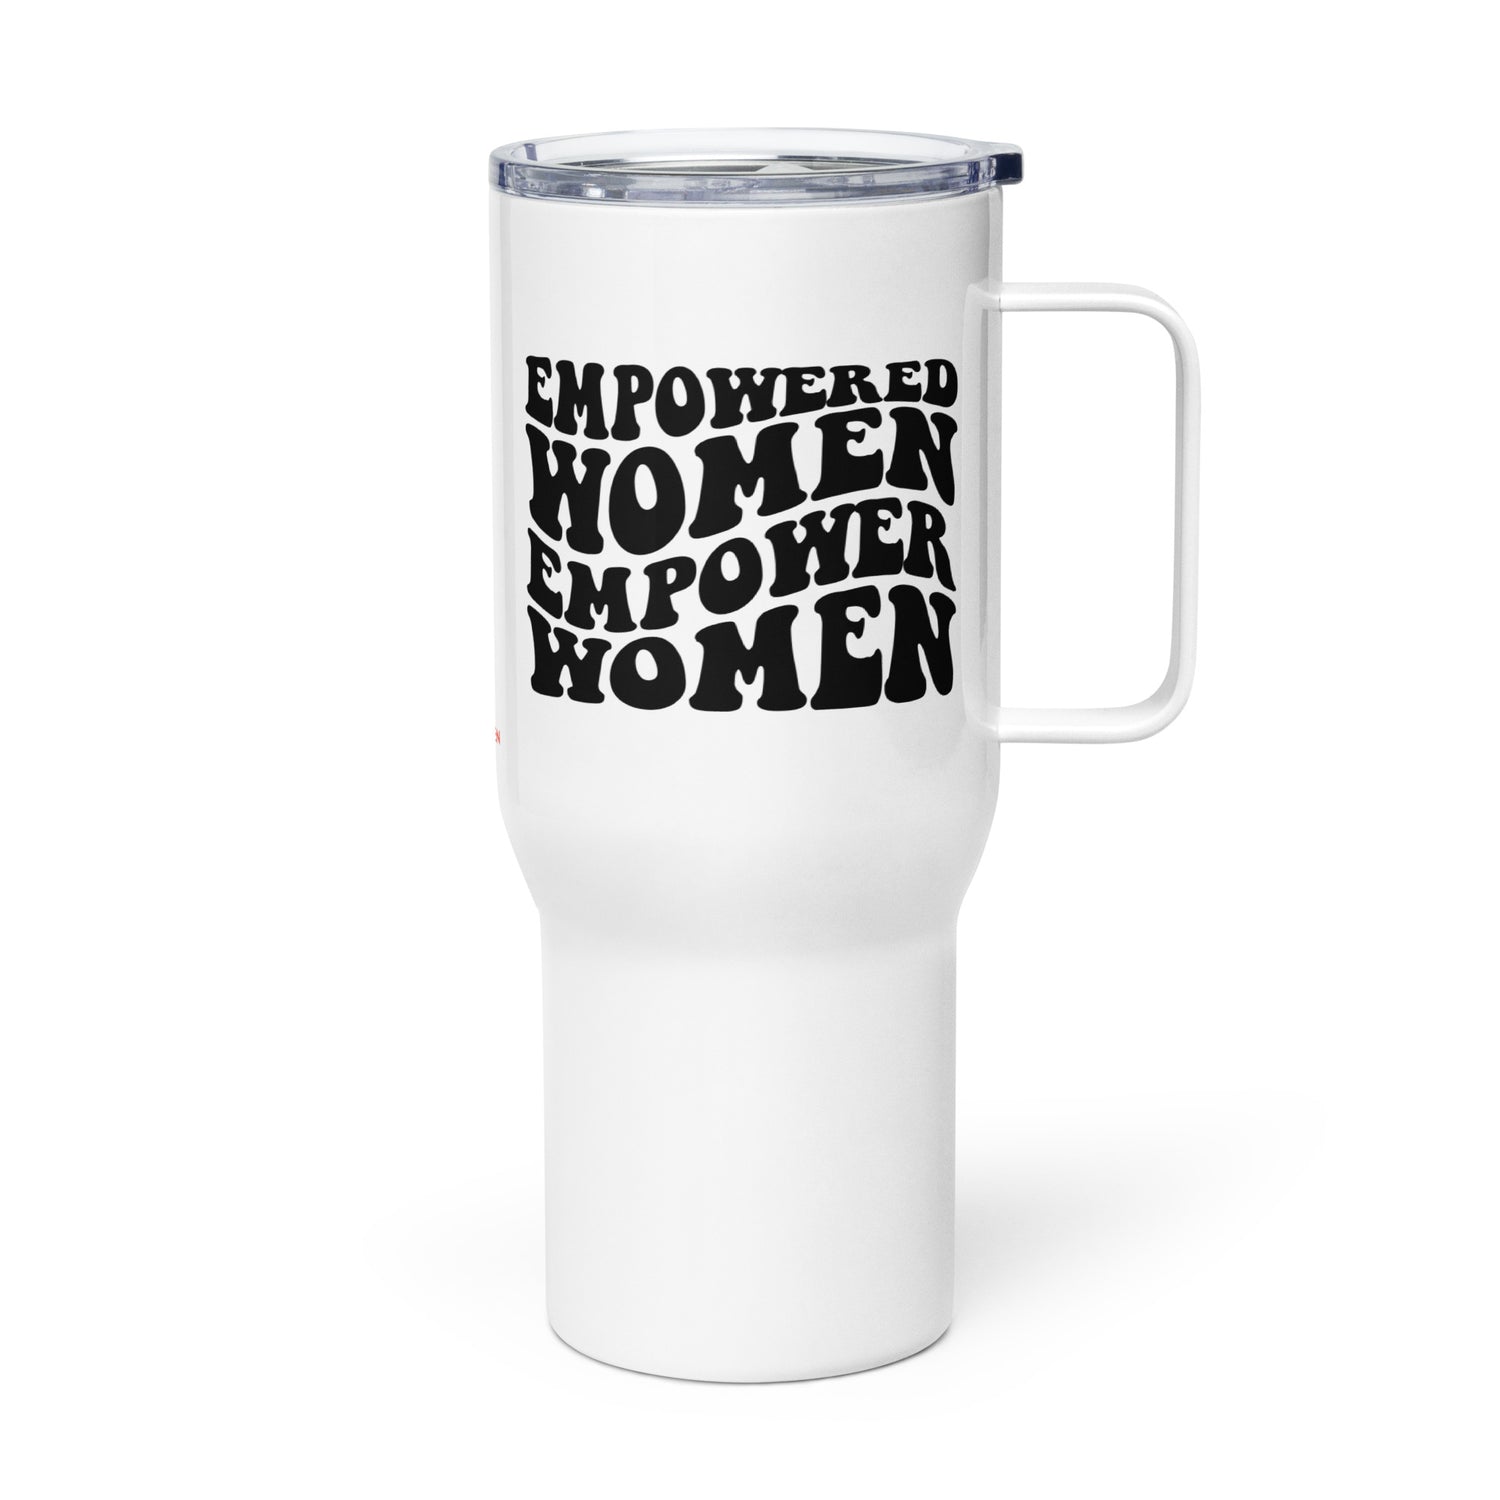 Empowered Women - Travel mug with a handle